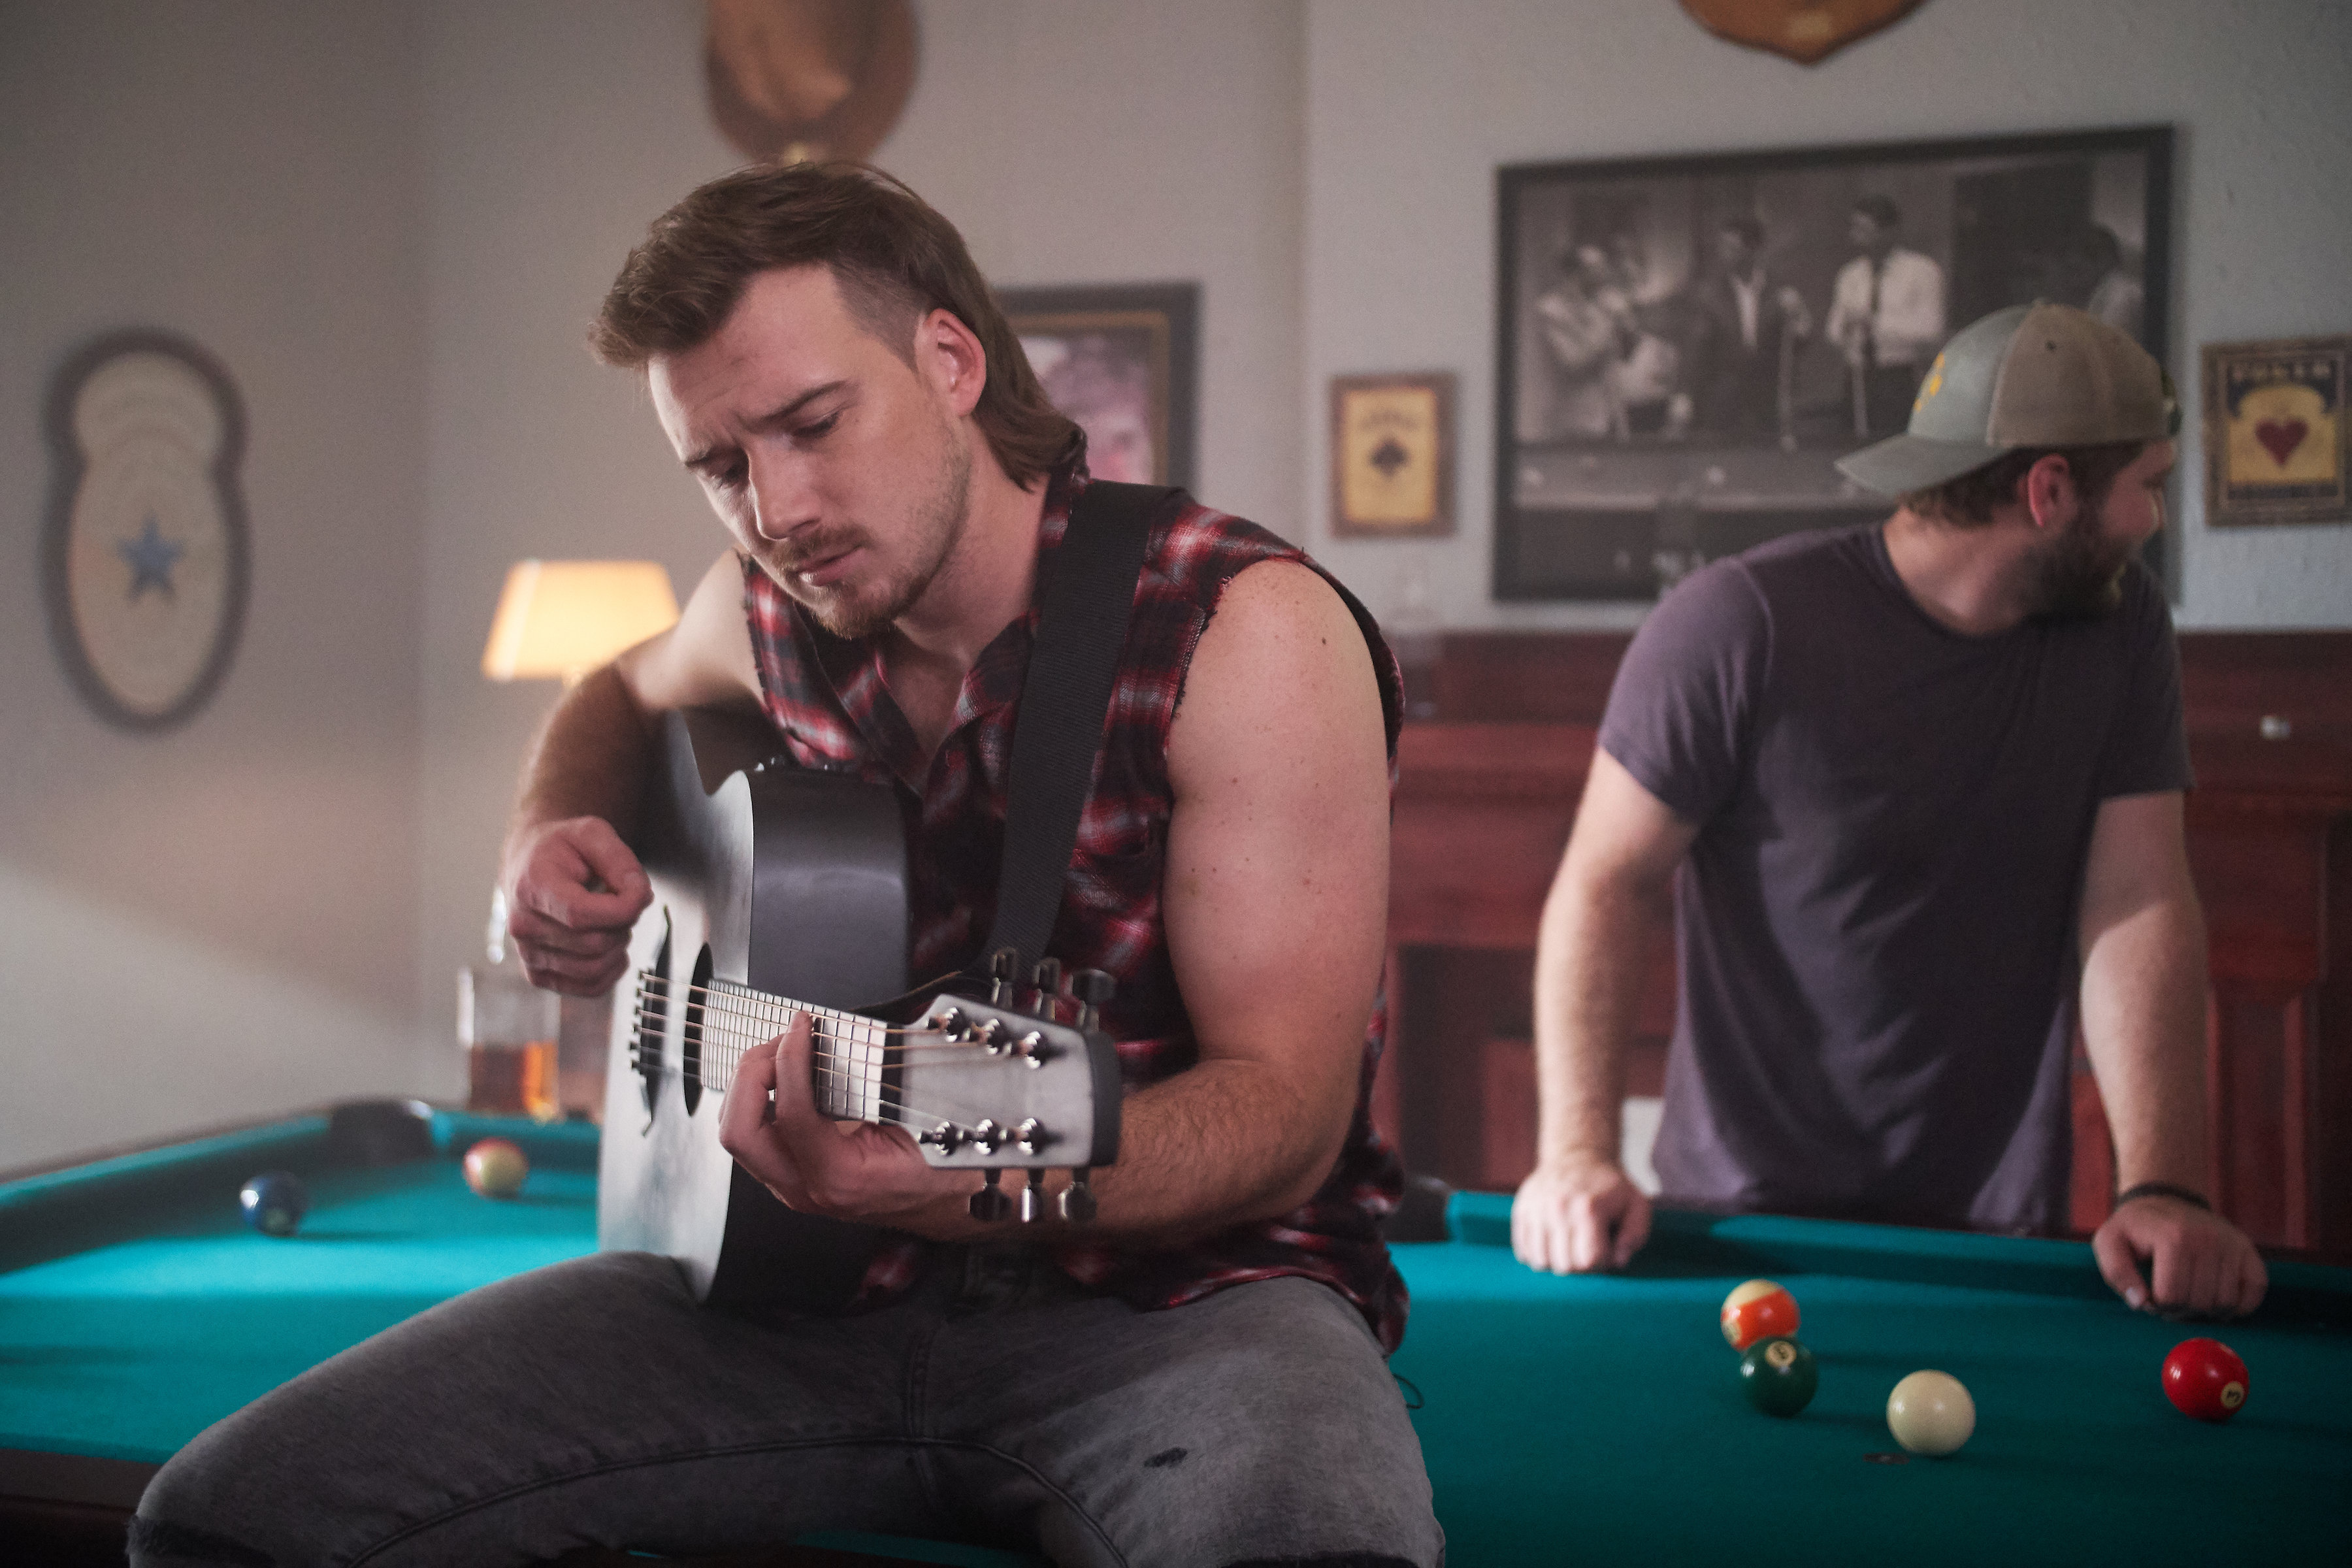 Morgan Wallen Drinks to Forget in New Music Video “Whiskey Glasses” – Watch Now